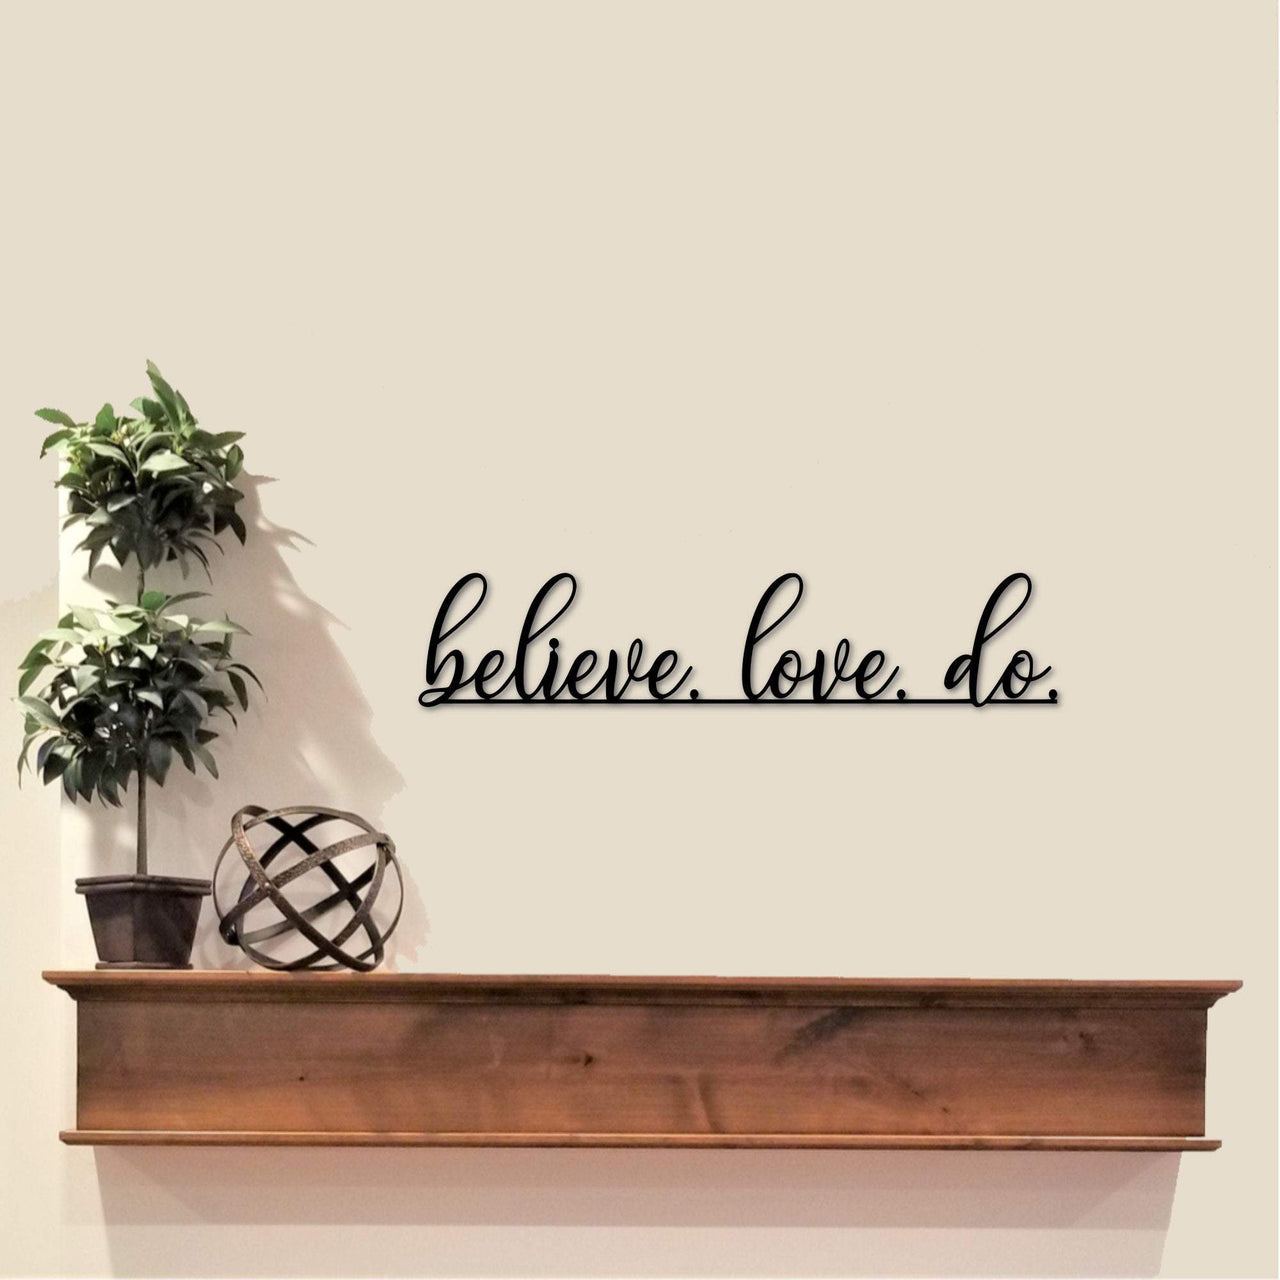 Believe Love Do Metal Wall Quote | Metal Wall Art | Inspirational Words | Motivational Quotes for the Wall | Religious Sayings and Wall Art